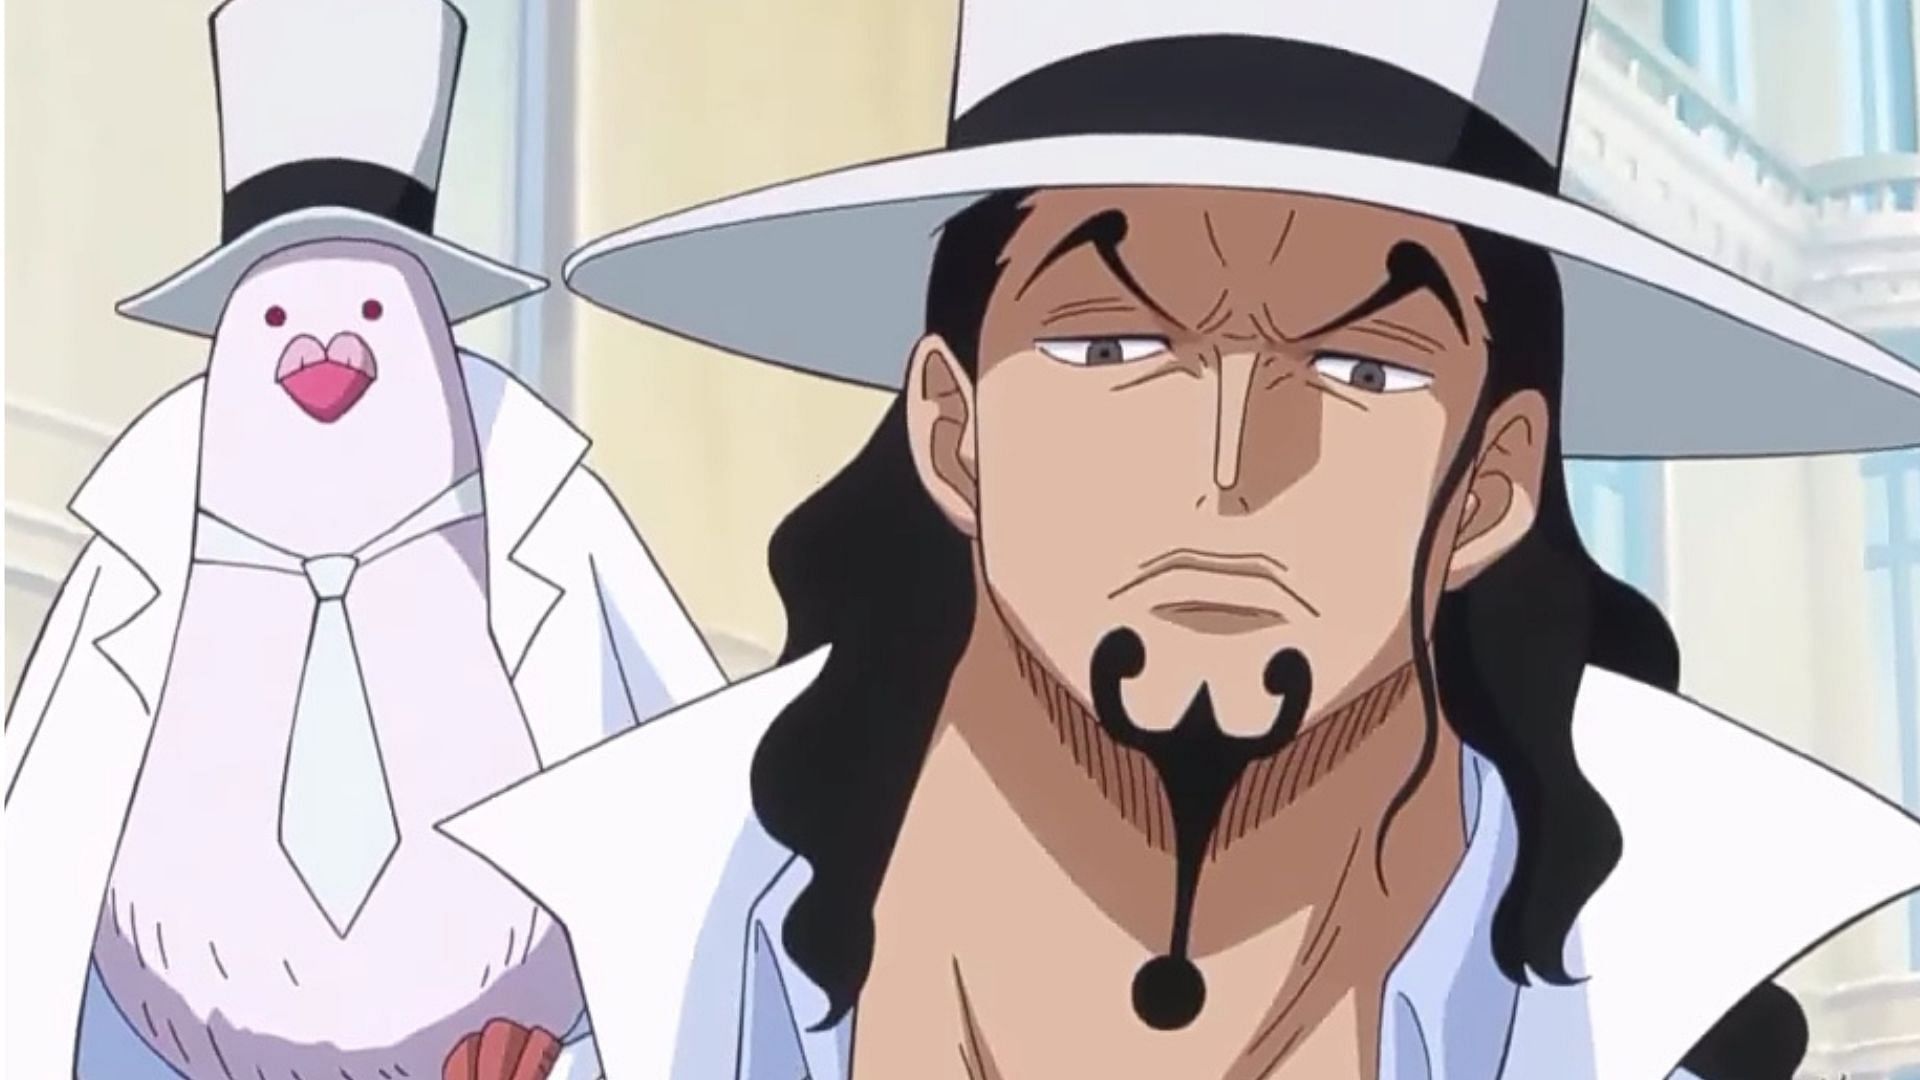 Rob Lucci as seen in One Piece (Image via Toei Animation)